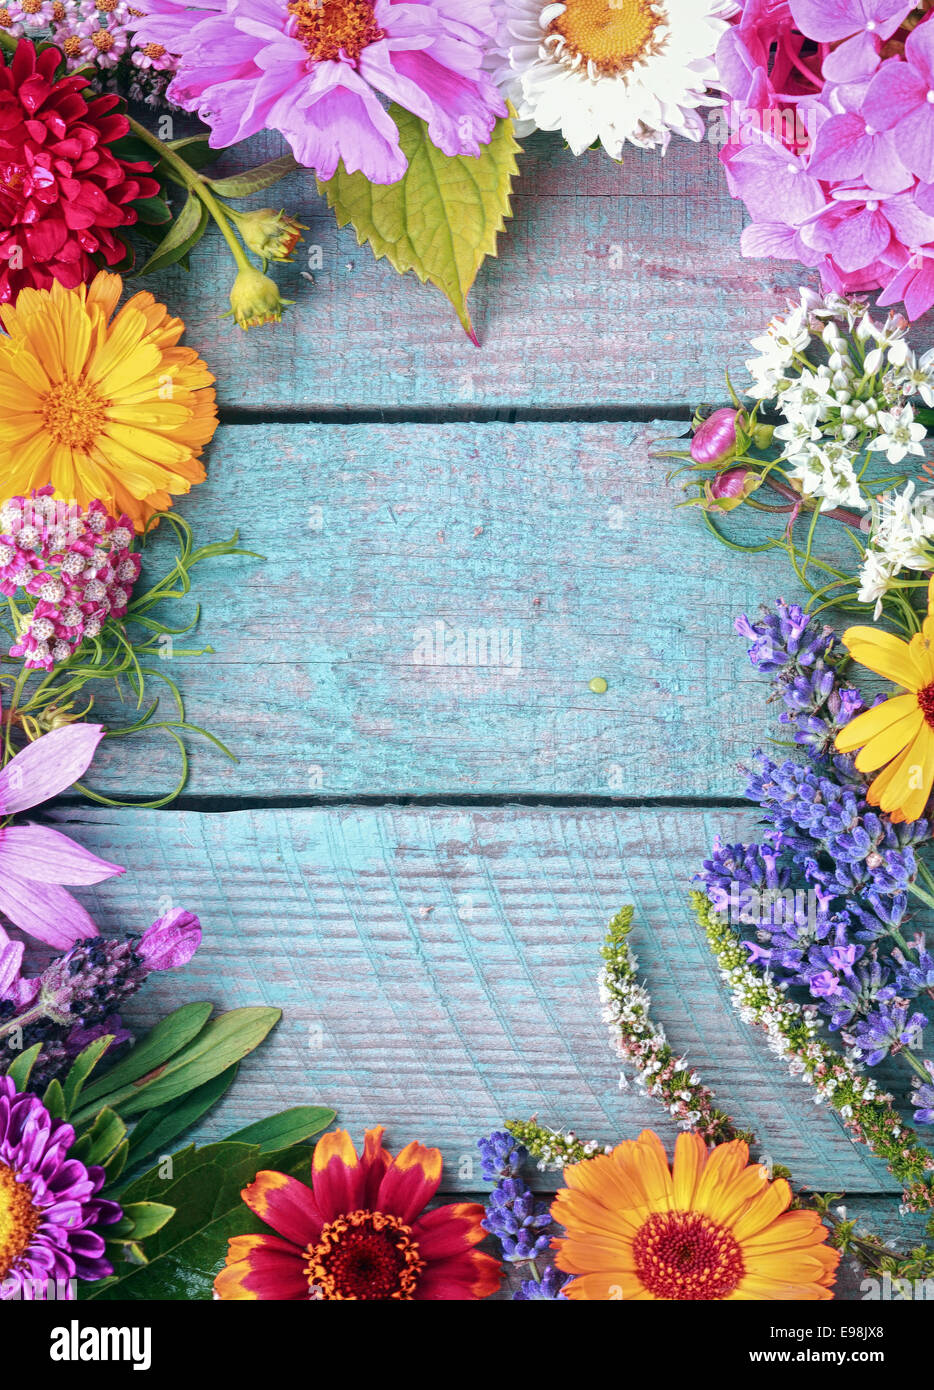 Download Beautiful fresh floral border of assorted colorful summer ...